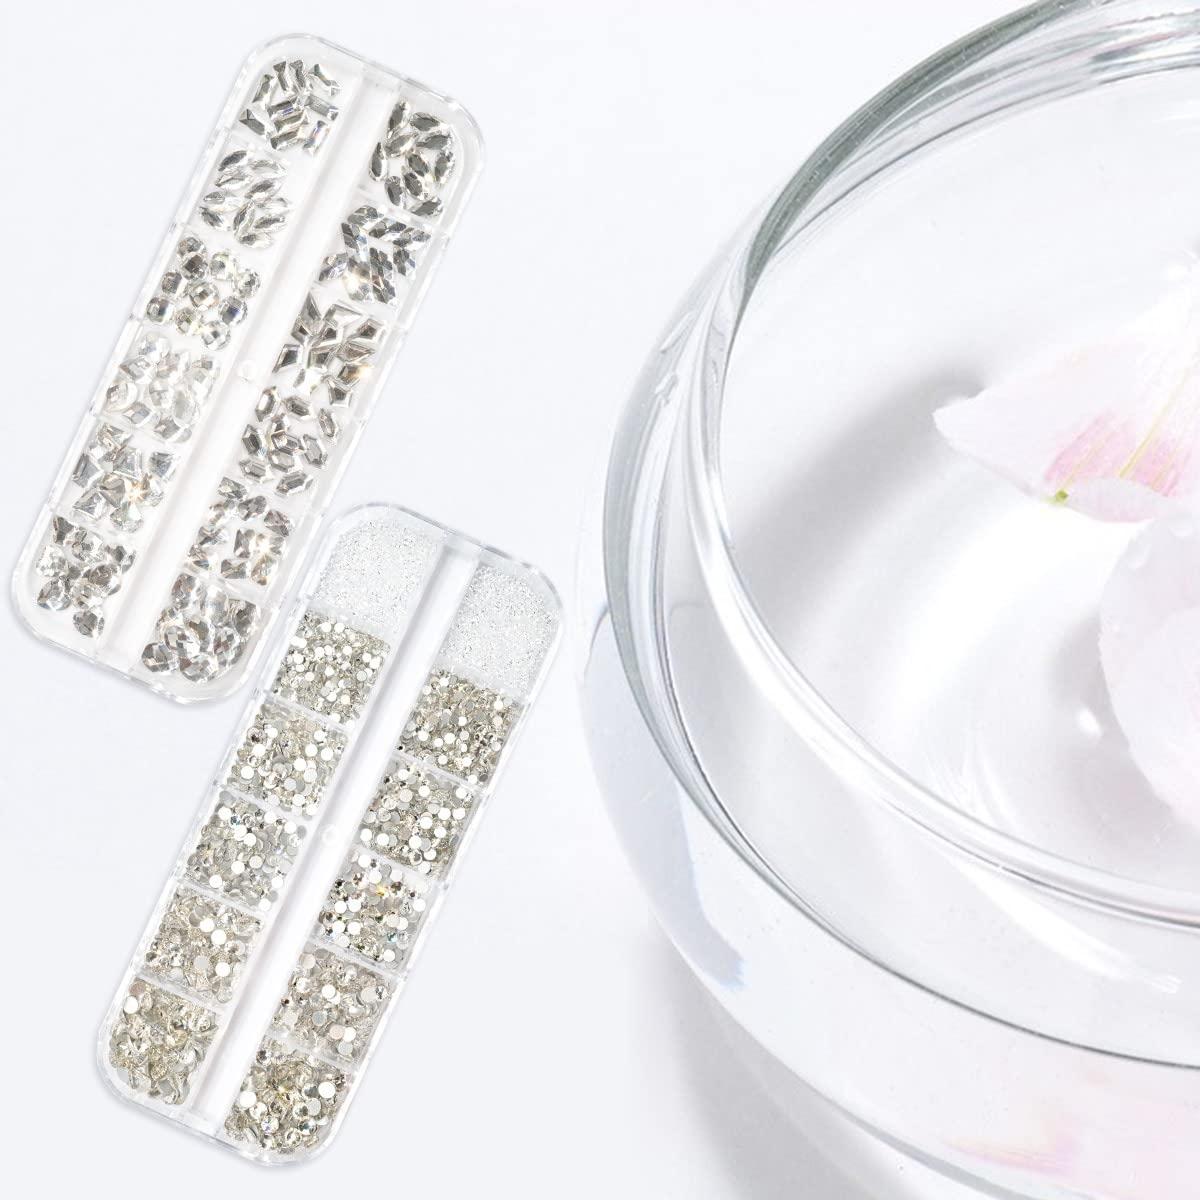 DIAO79NI Rhinestones 1440pcs SS20 Glass Nail Art Crystal Clear White  Flatback Gemstones for Crafts Nails Makeup Bags and Shoes Decoration（SS20,  Clear